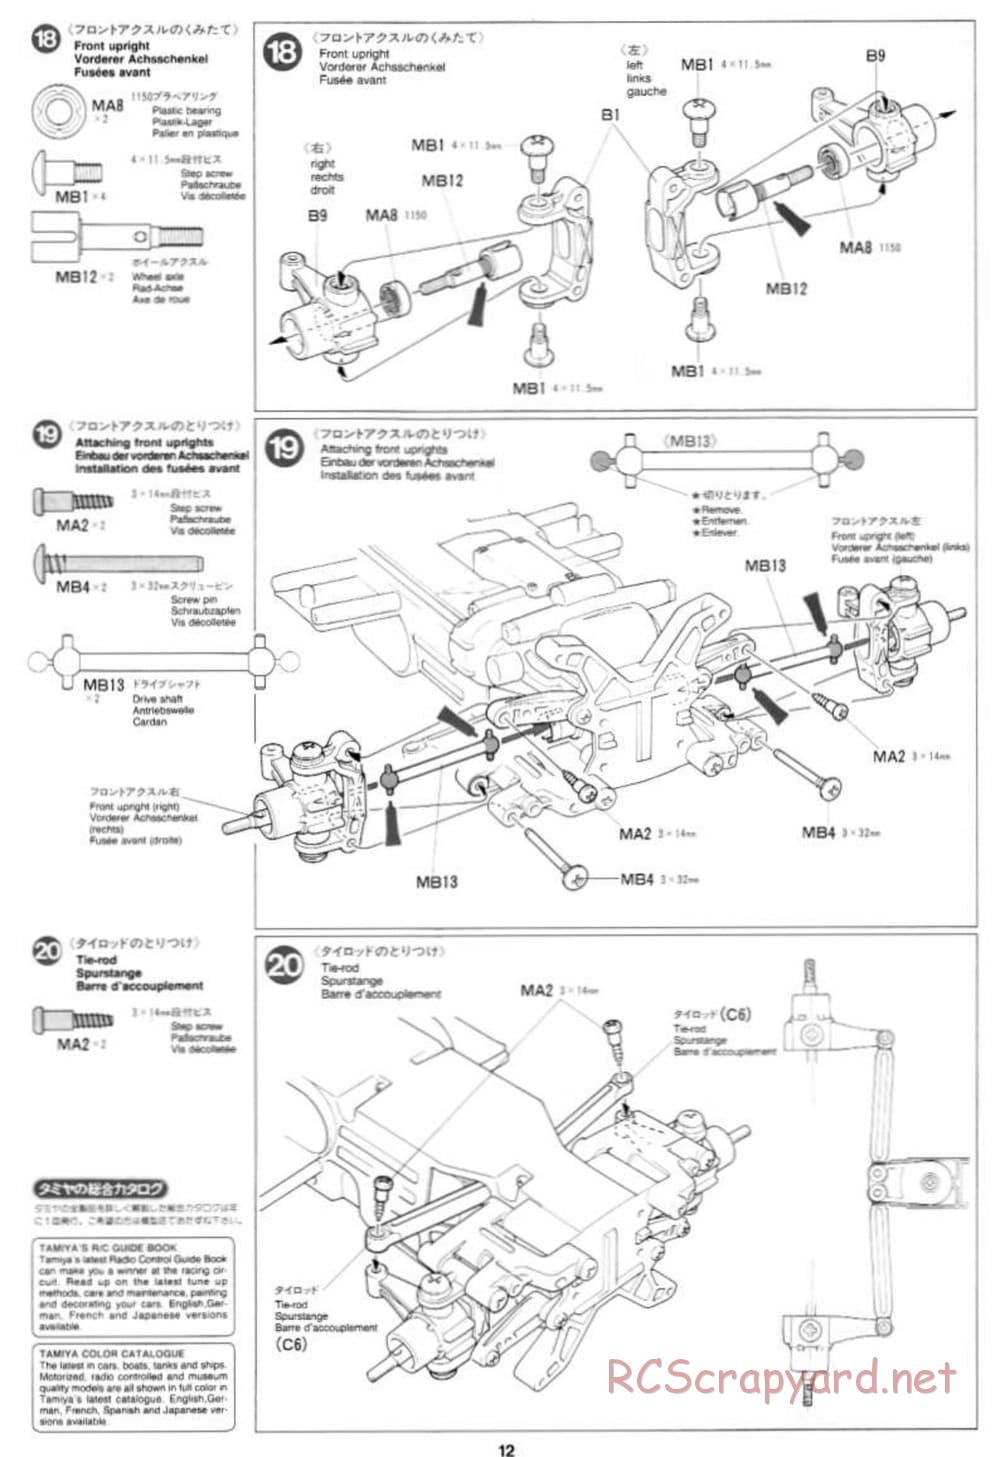 Tamiya - Toyota Celica GT-Four 97 Monte Carlo - TL-01 Chassis - Manual - Page 12